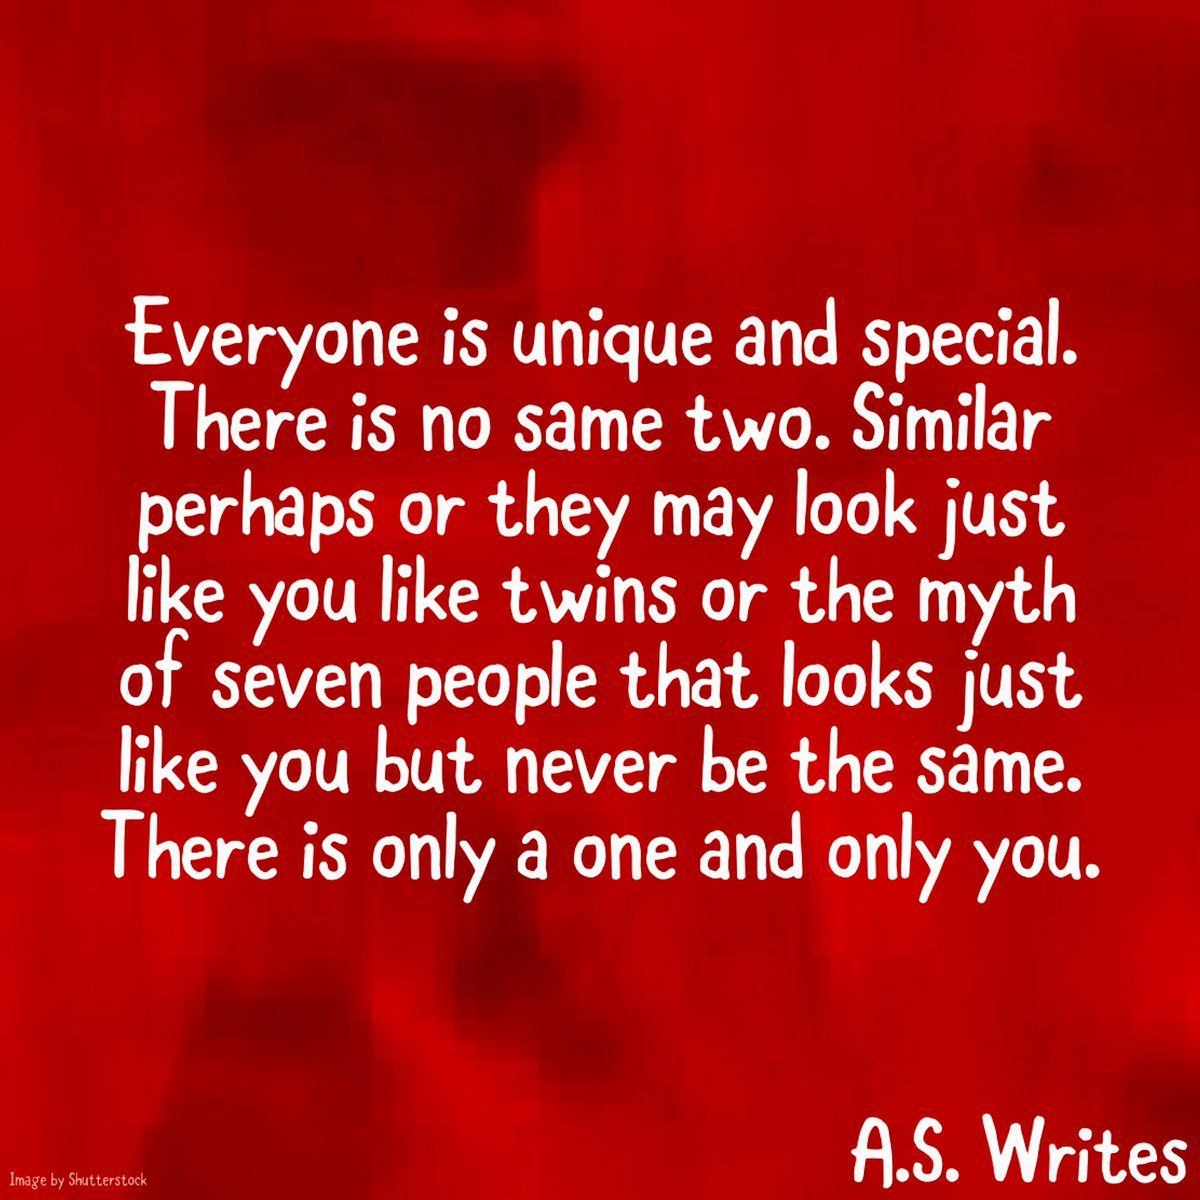 #special #everyone #everyoneisbeautiful #everyoneisdifferent #unique #life #lifequotes #lifequote #lifequotestagram #people #wearebeautiful #wearespecial #quotes #quotestagram #quotesandsayings #quotesaboutlifequotesandsayings #quotesdaily #quotesoninstagram #peopleareawesome